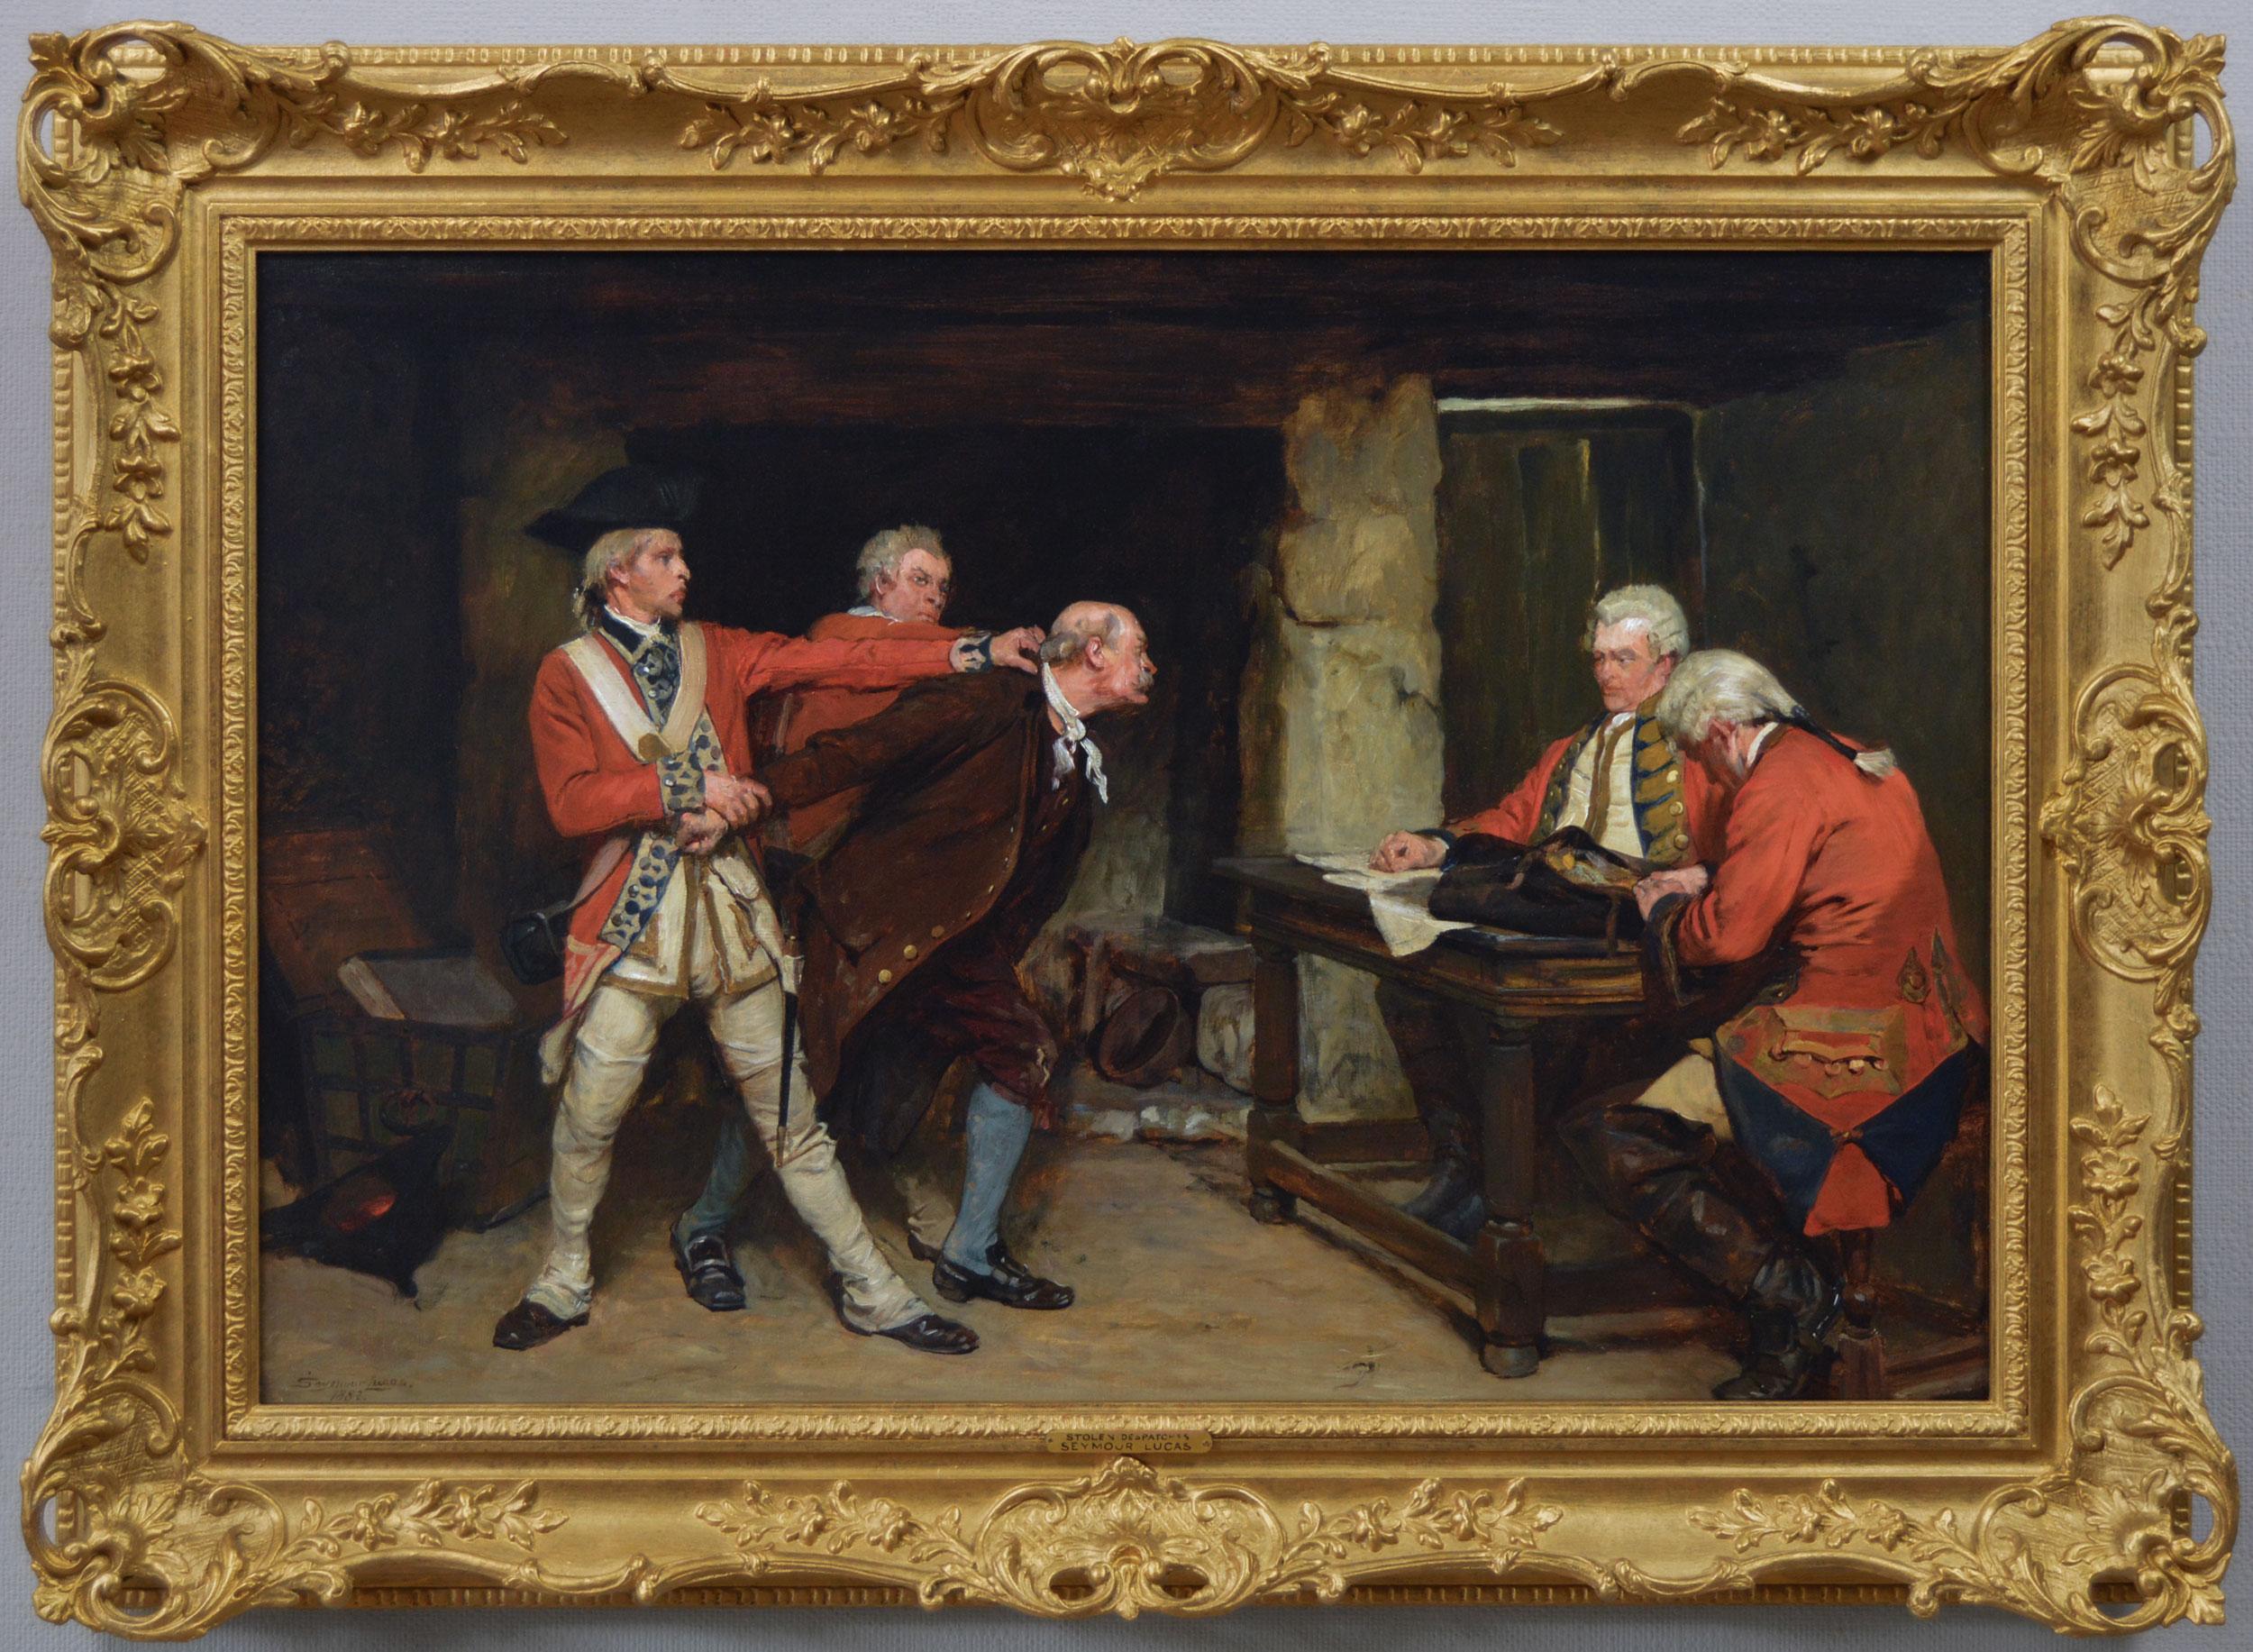 Historical military oil painting of a prisoner being brought before officers